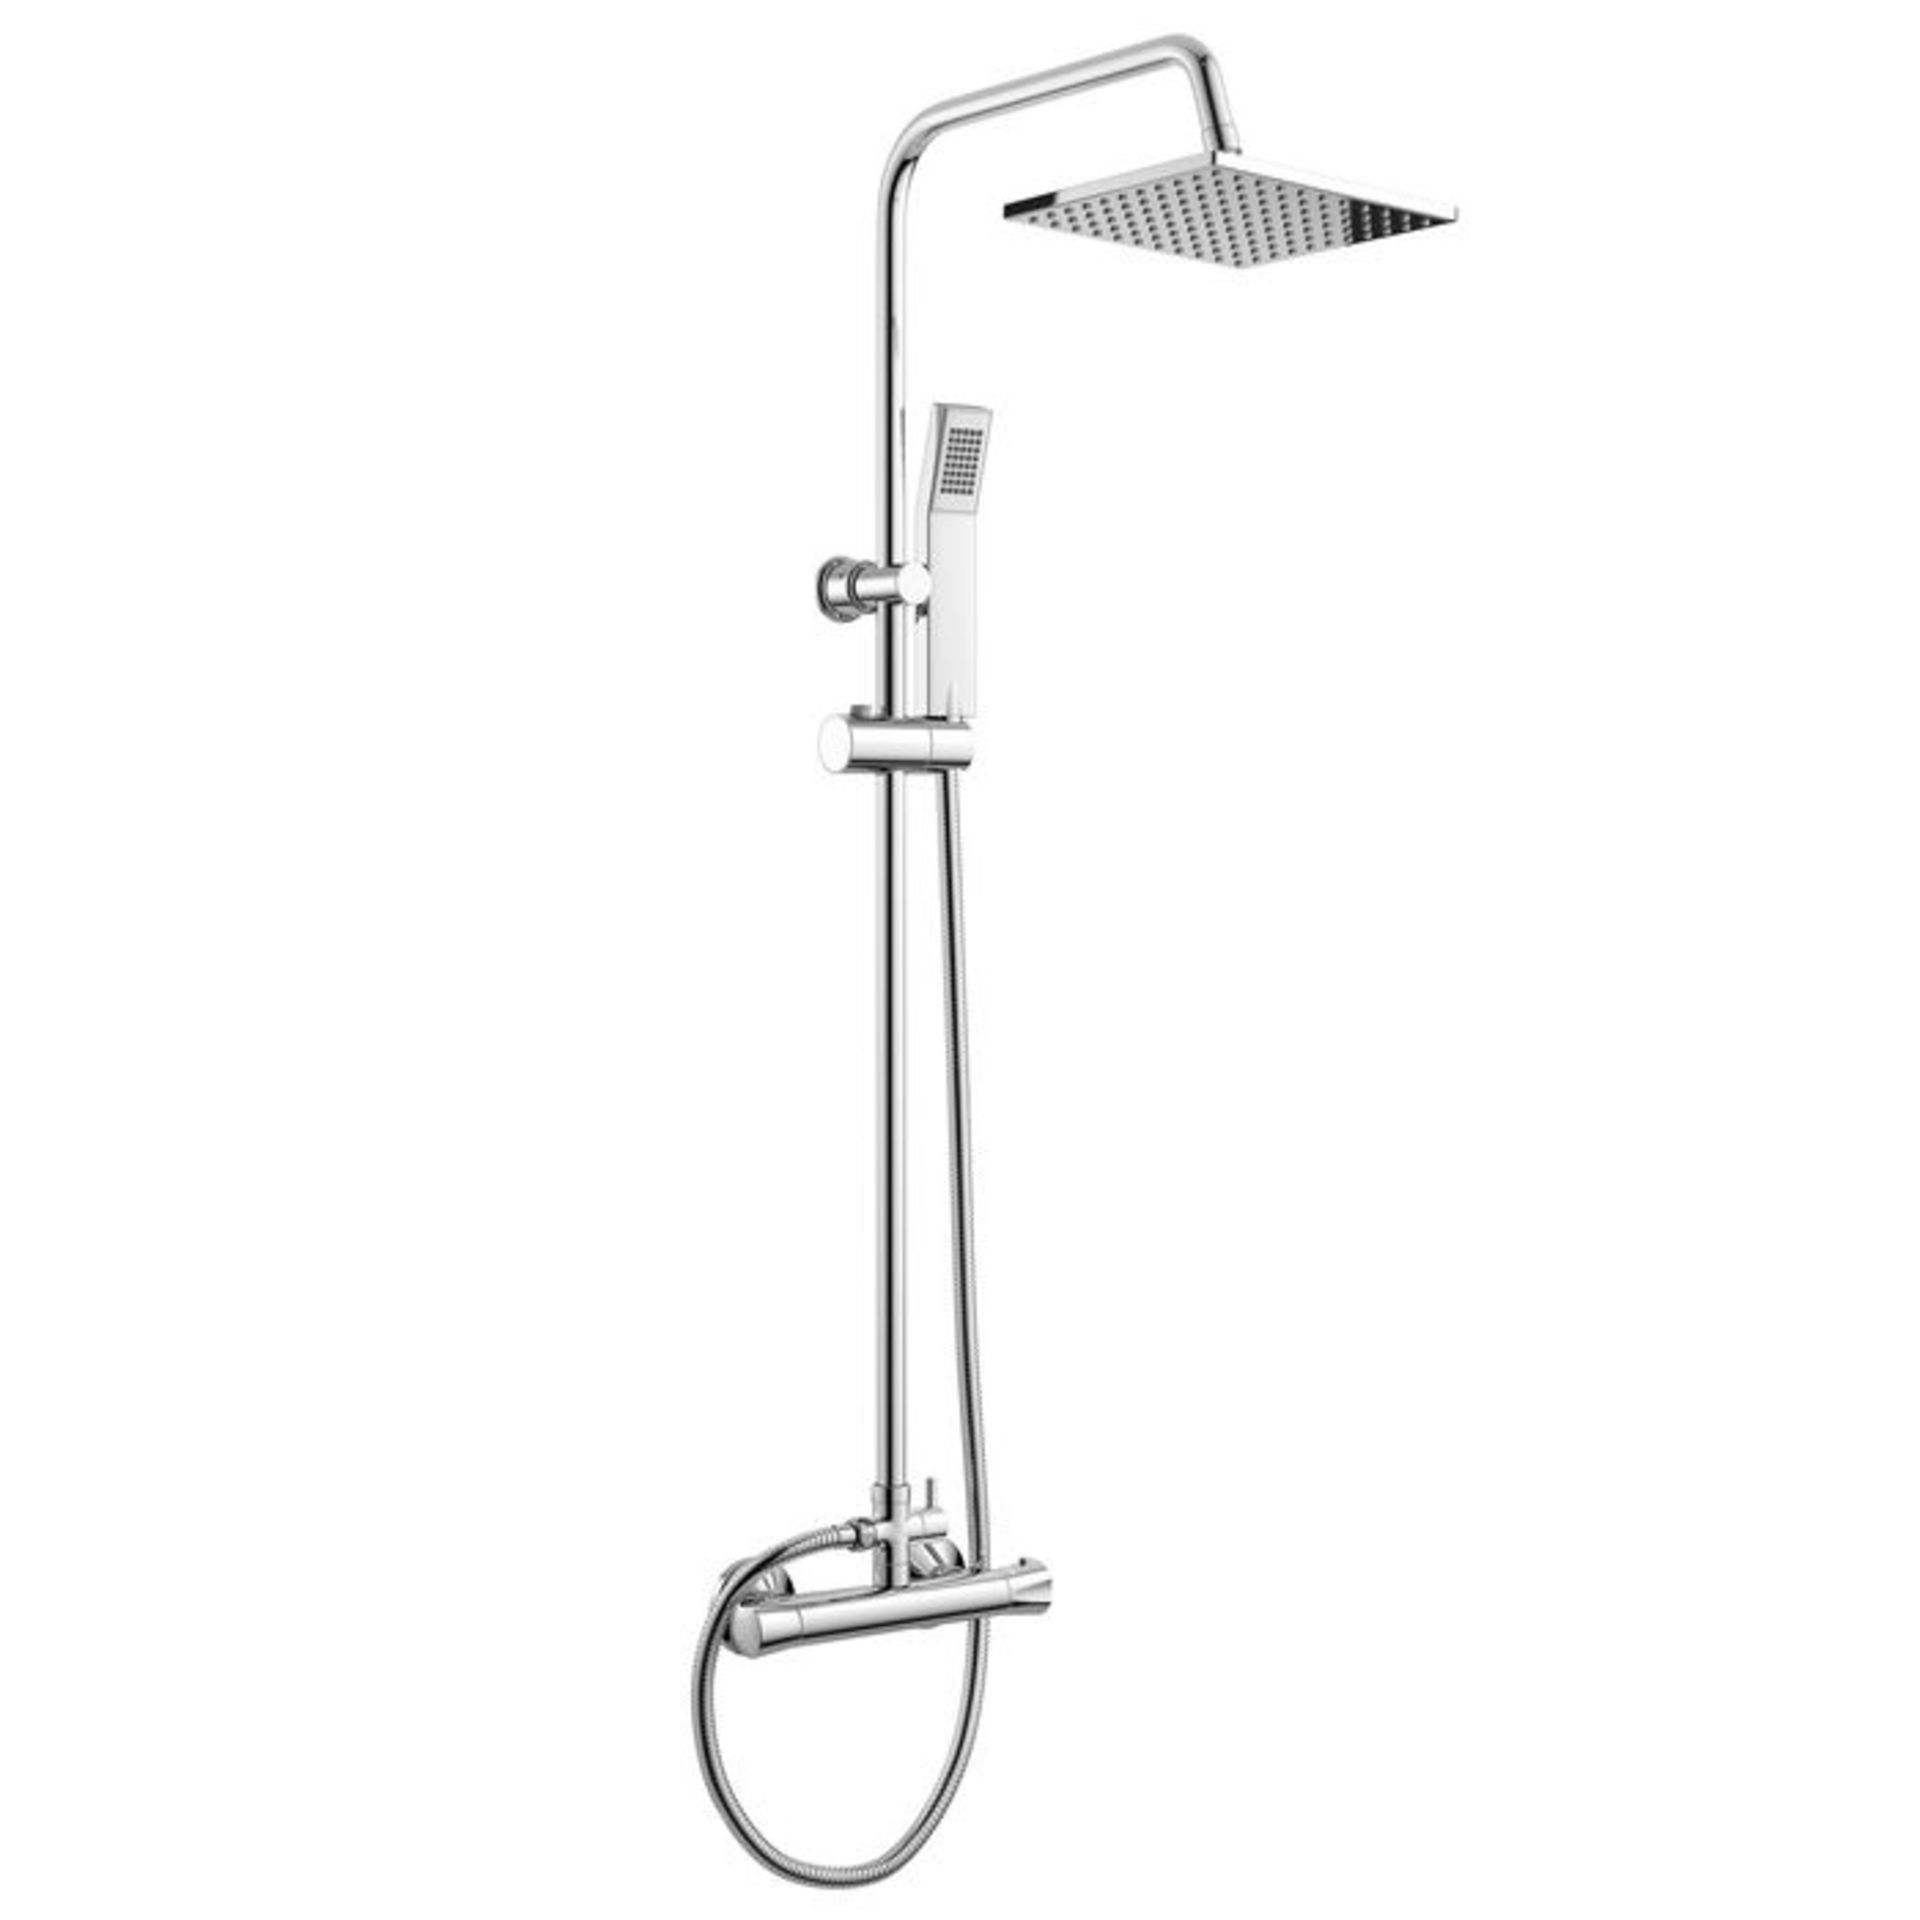 (GR86) Square Exposed Thermostatic Shower Kit & Medium Head. Curved features and contemporary